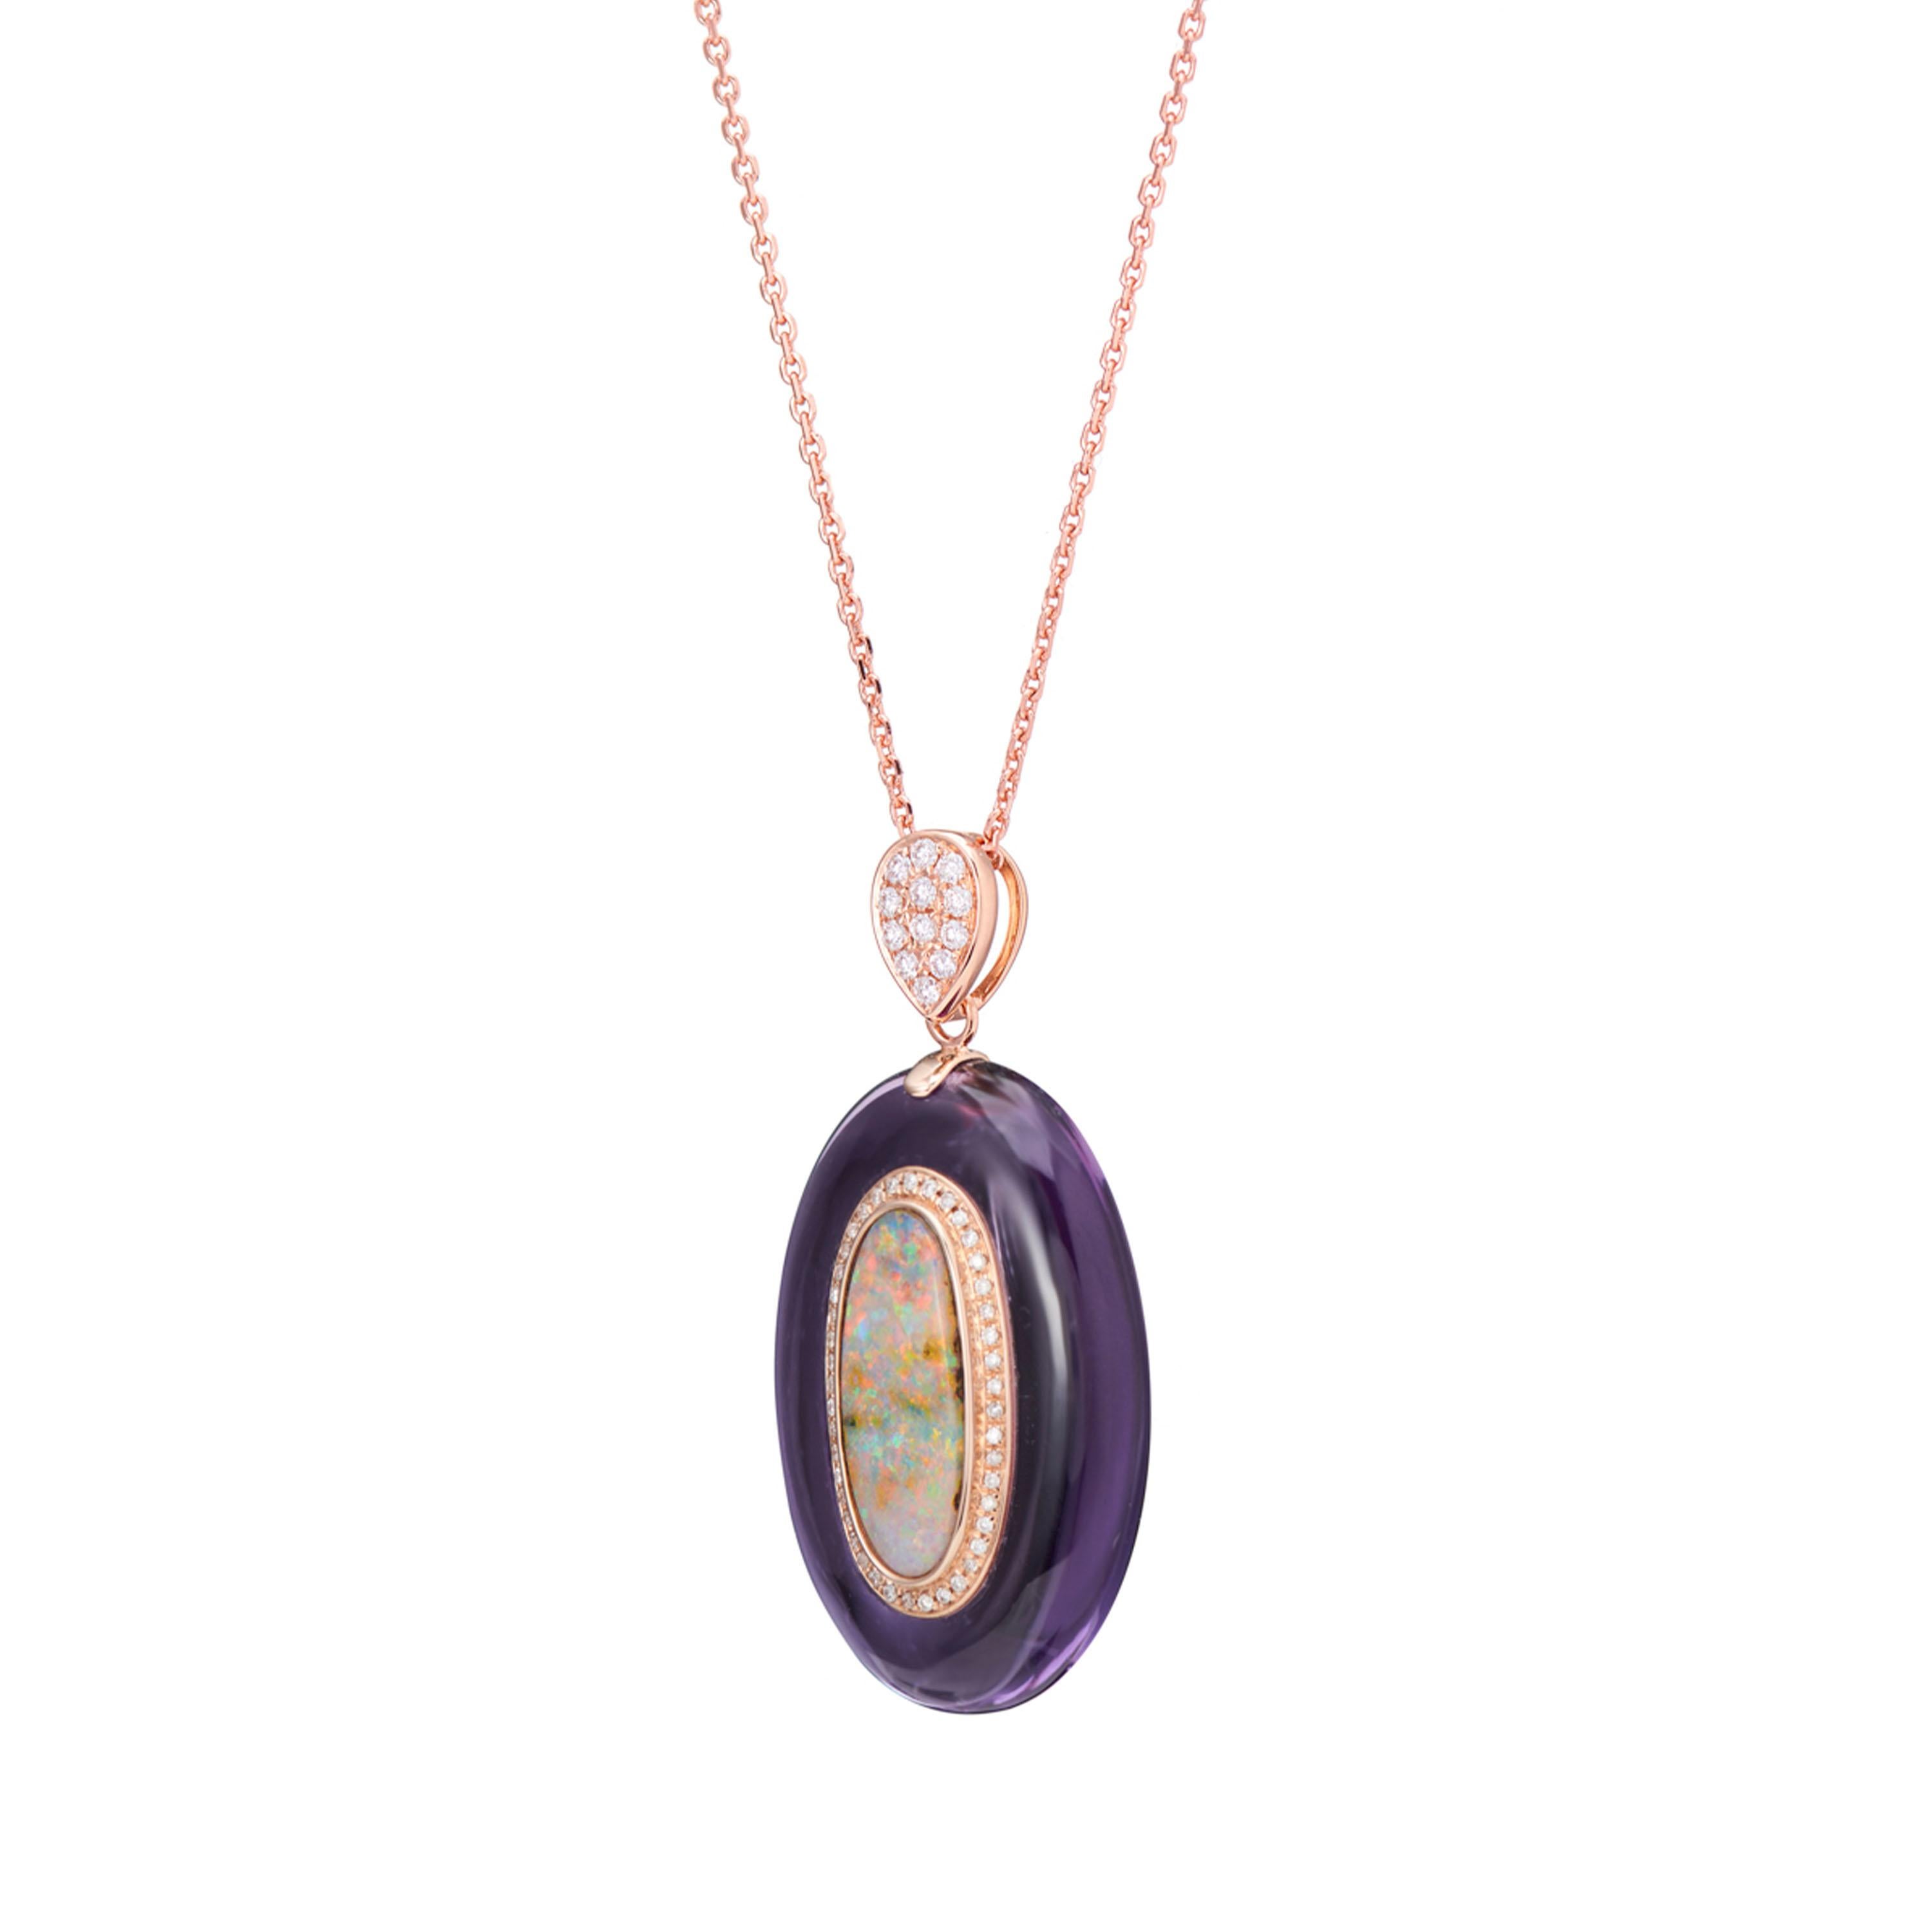 Description:
Modern classic keepsake using a combination of birthstones. Our one-of-a-kind pendant features a 18.6ct polished amethyst cabochon inlaid with a prismatic opal. The classic touch comes in form of diamond brilliance that total 0.173ct in